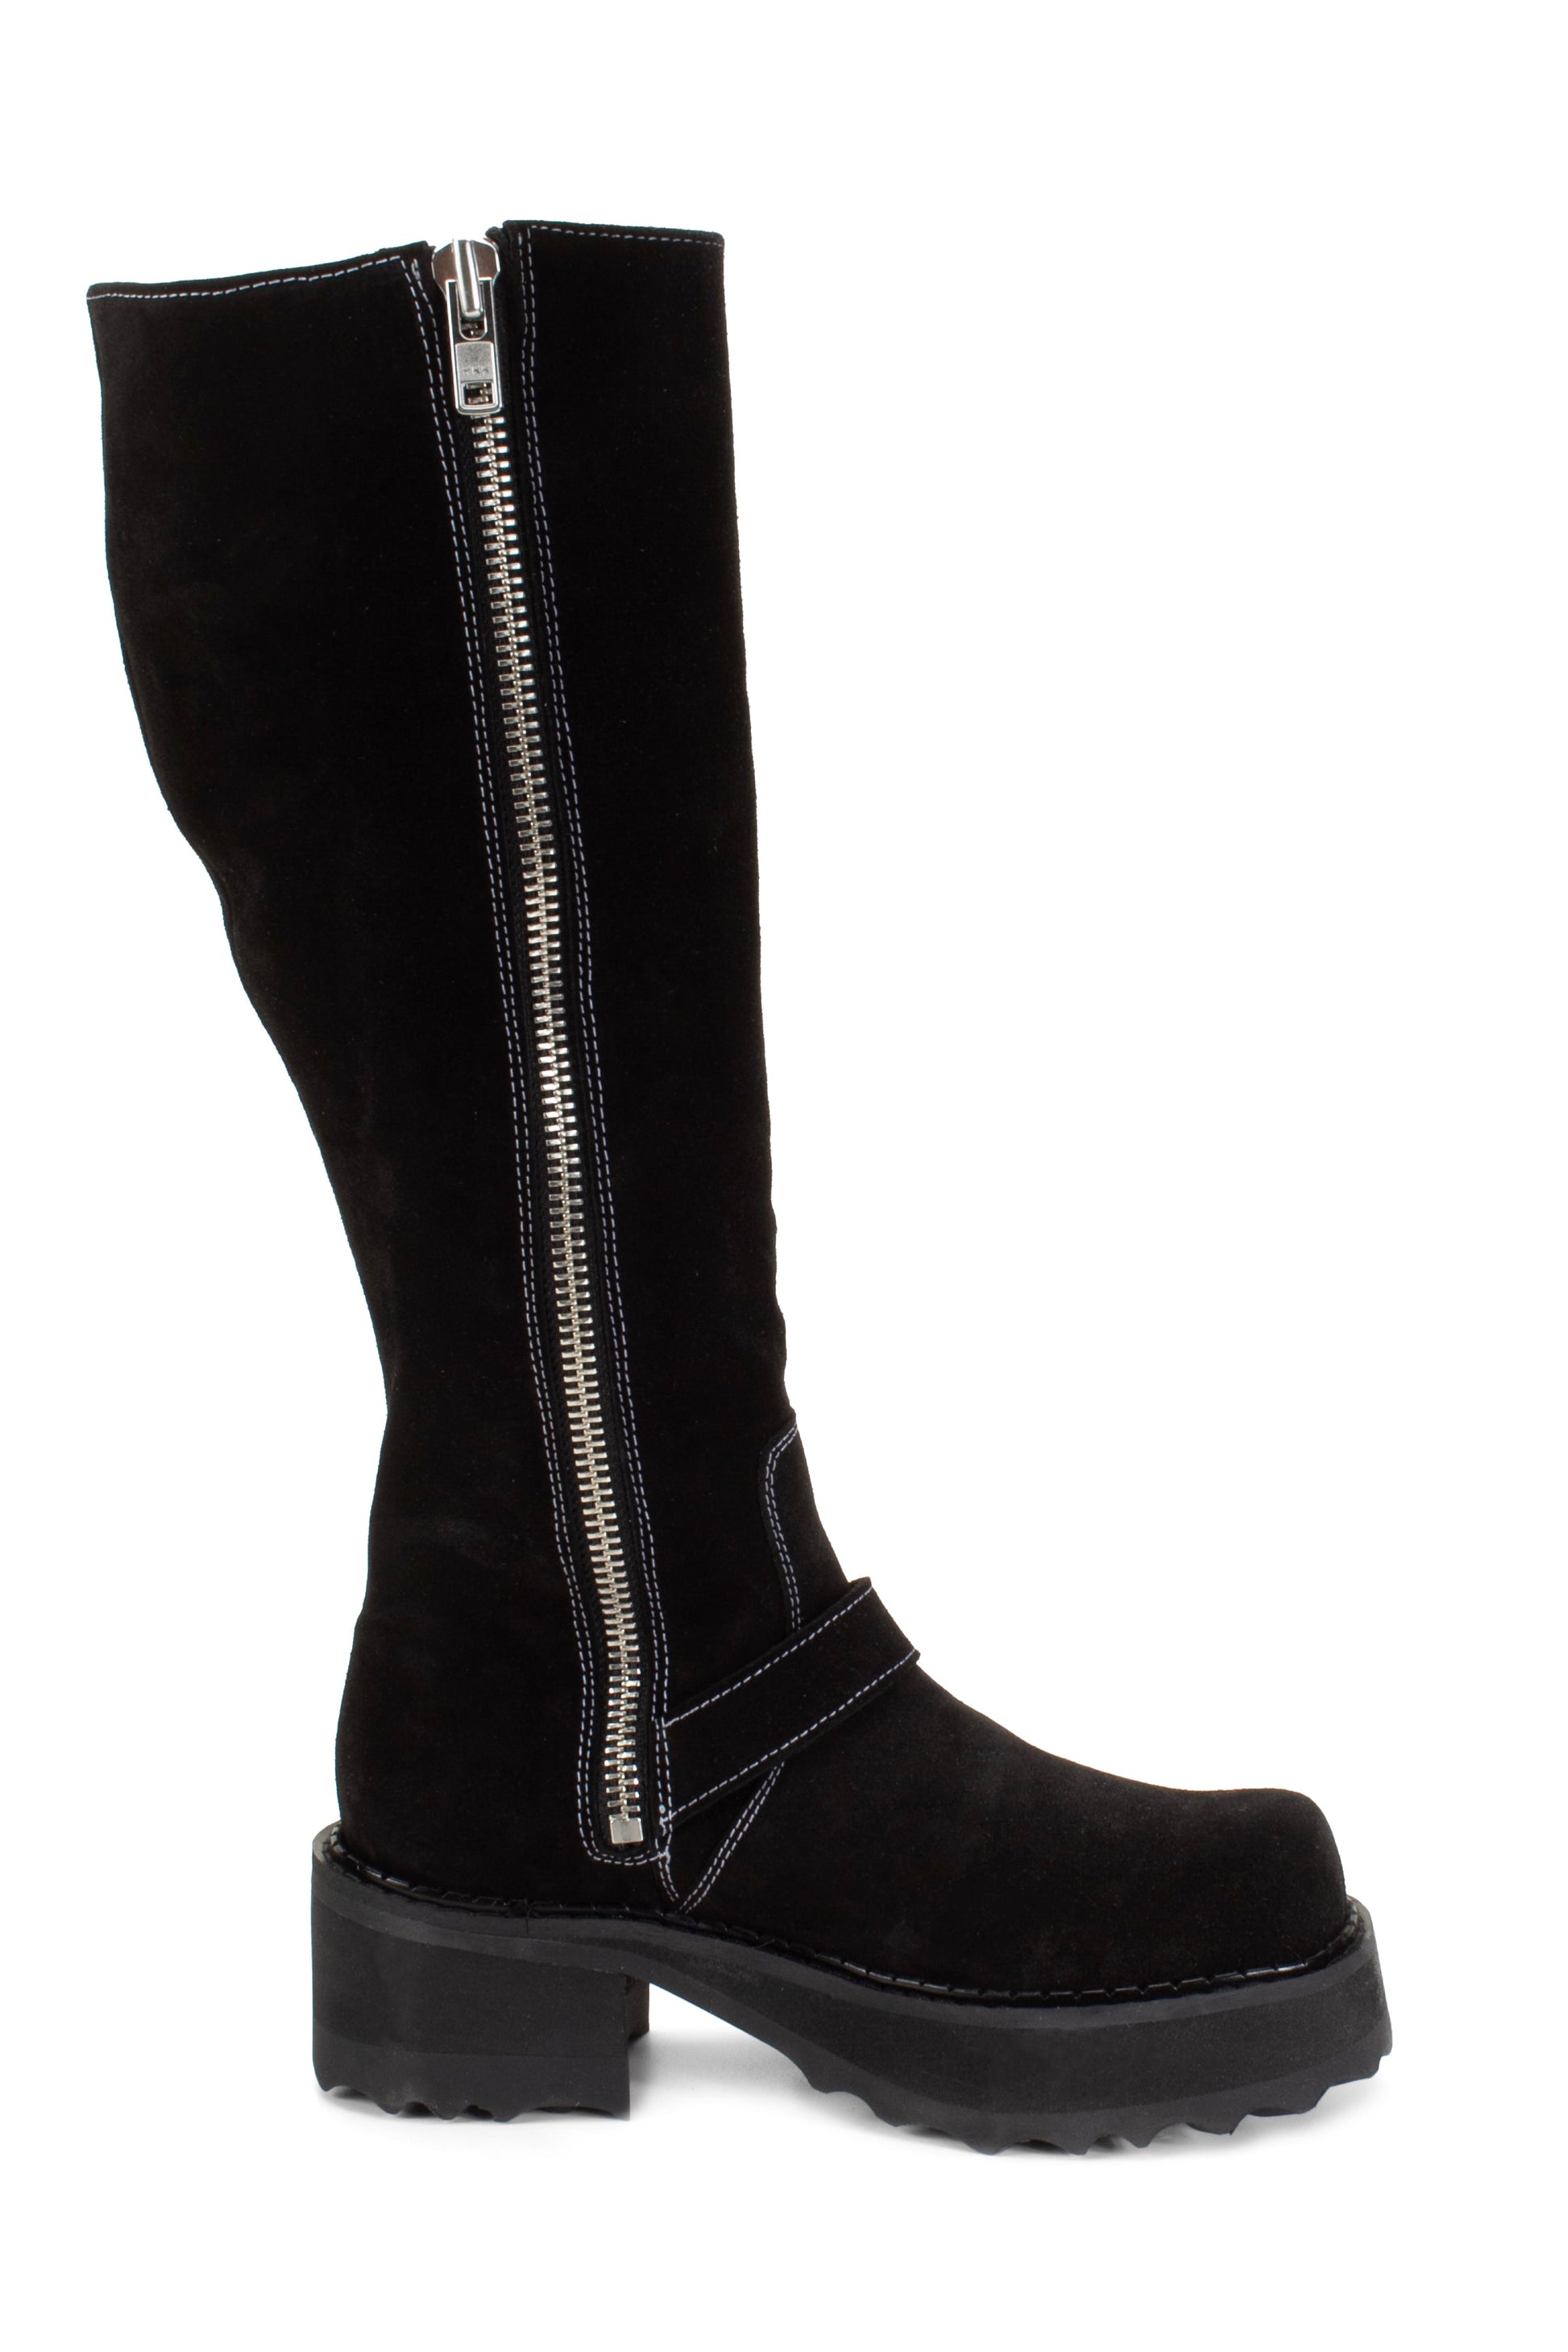 Large zipper inside the boots from top to bottom with white stitches start from the top